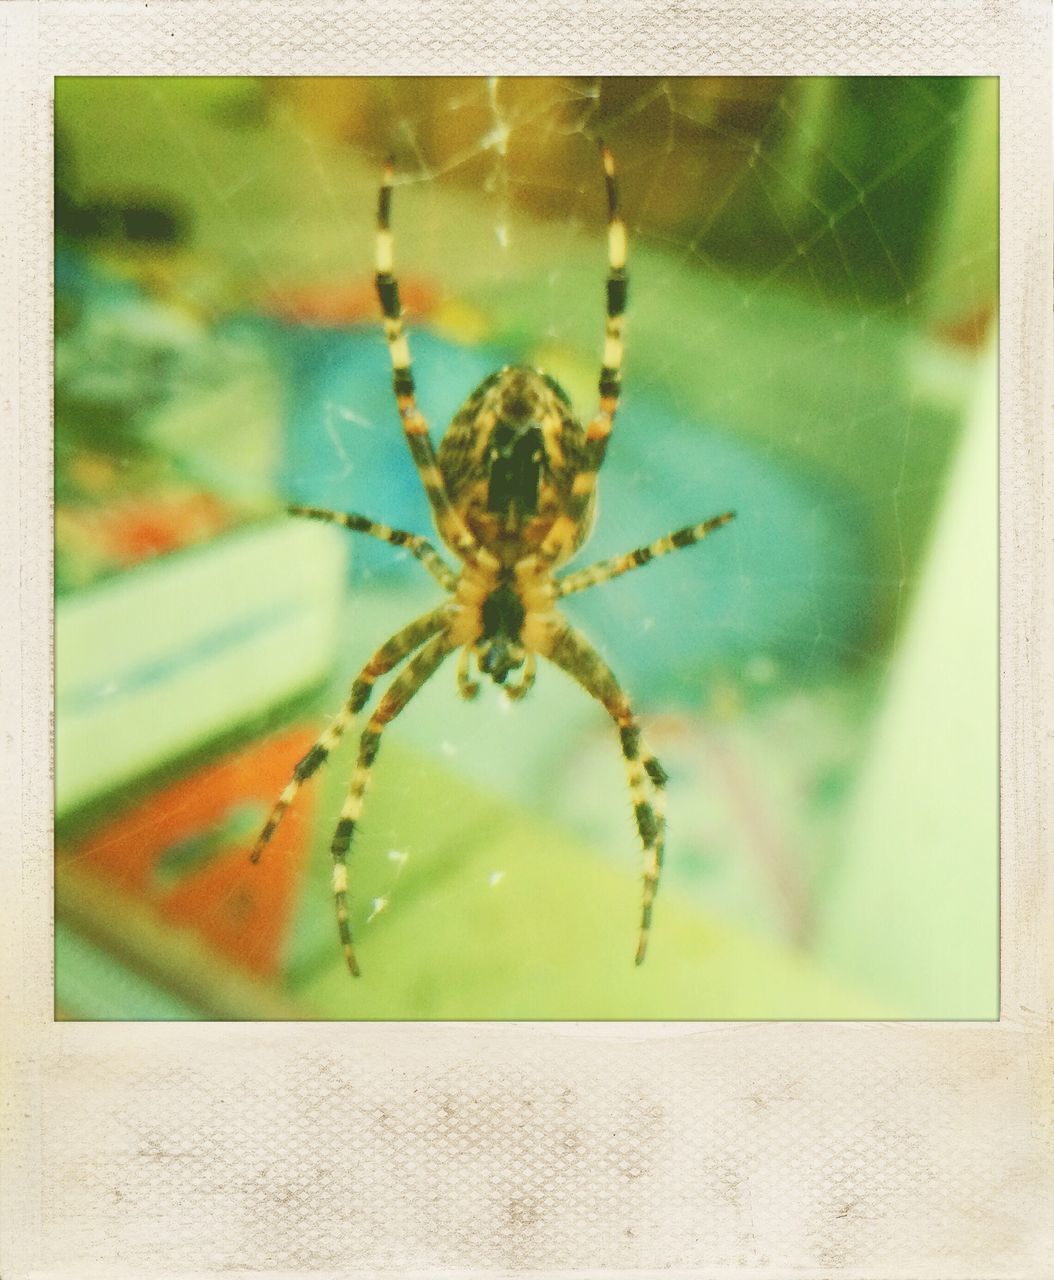 transfer print, insect, one animal, close-up, animal themes, auto post production filter, spider, wildlife, indoors, animals in the wild, focus on foreground, selective focus, spider web, no people, day, nature, glass - material, window, detail